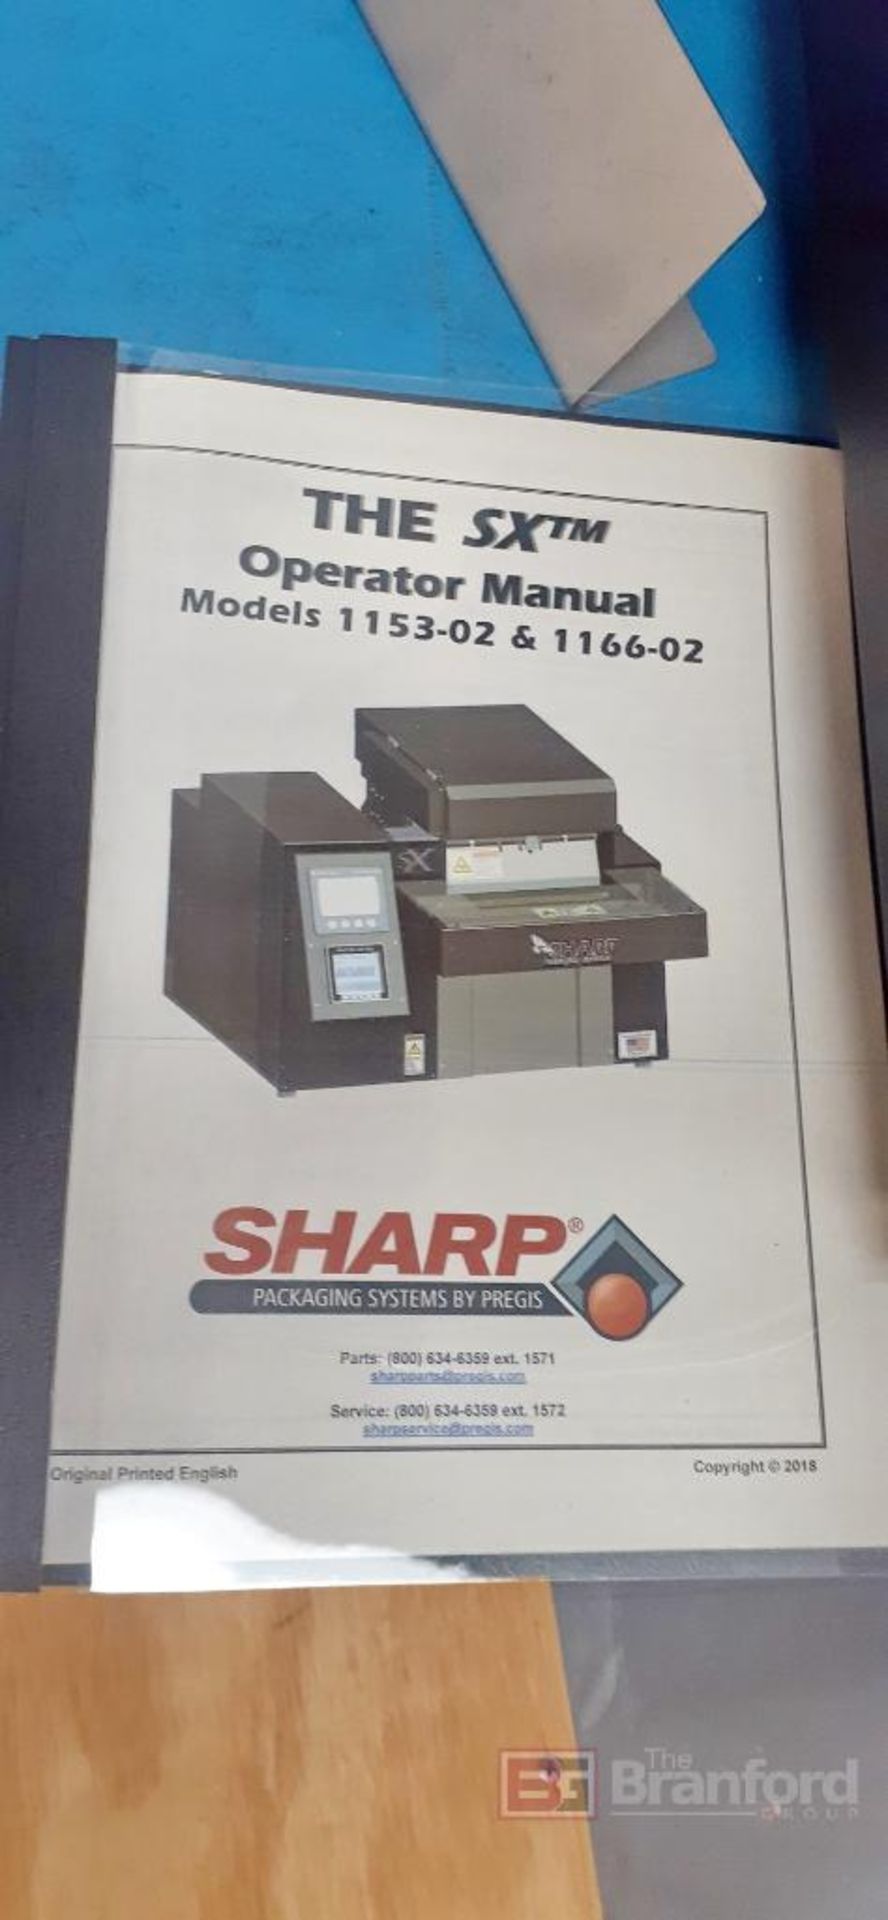 Sharp SXtm Model 1152-02, Continuous Roll Bagging System - Image 3 of 7